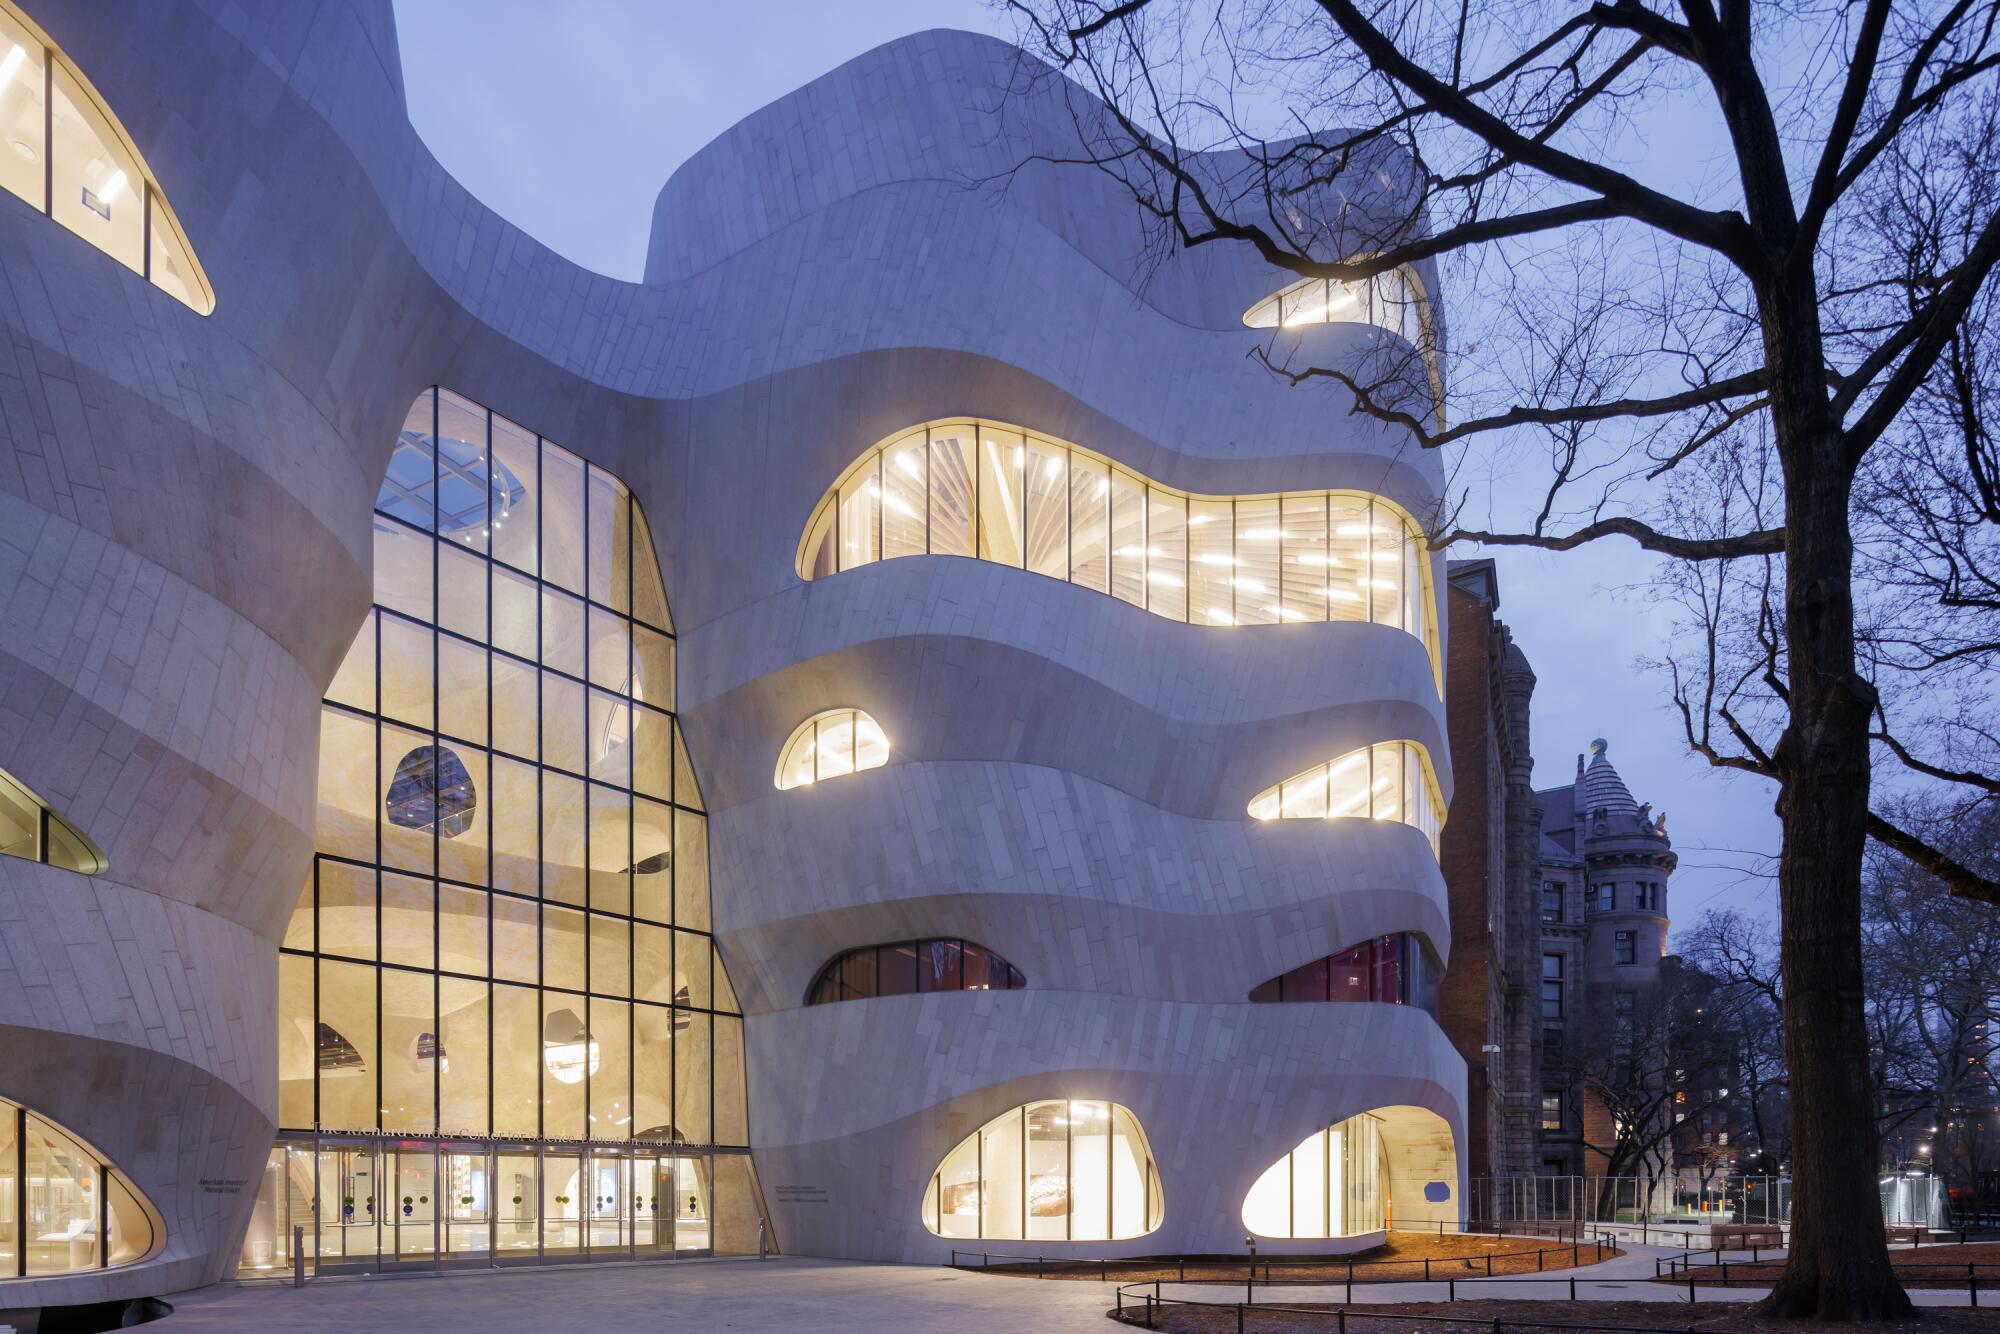 A building with a curving facade revealing irregularly shaped windows is illuminated from within at dusk